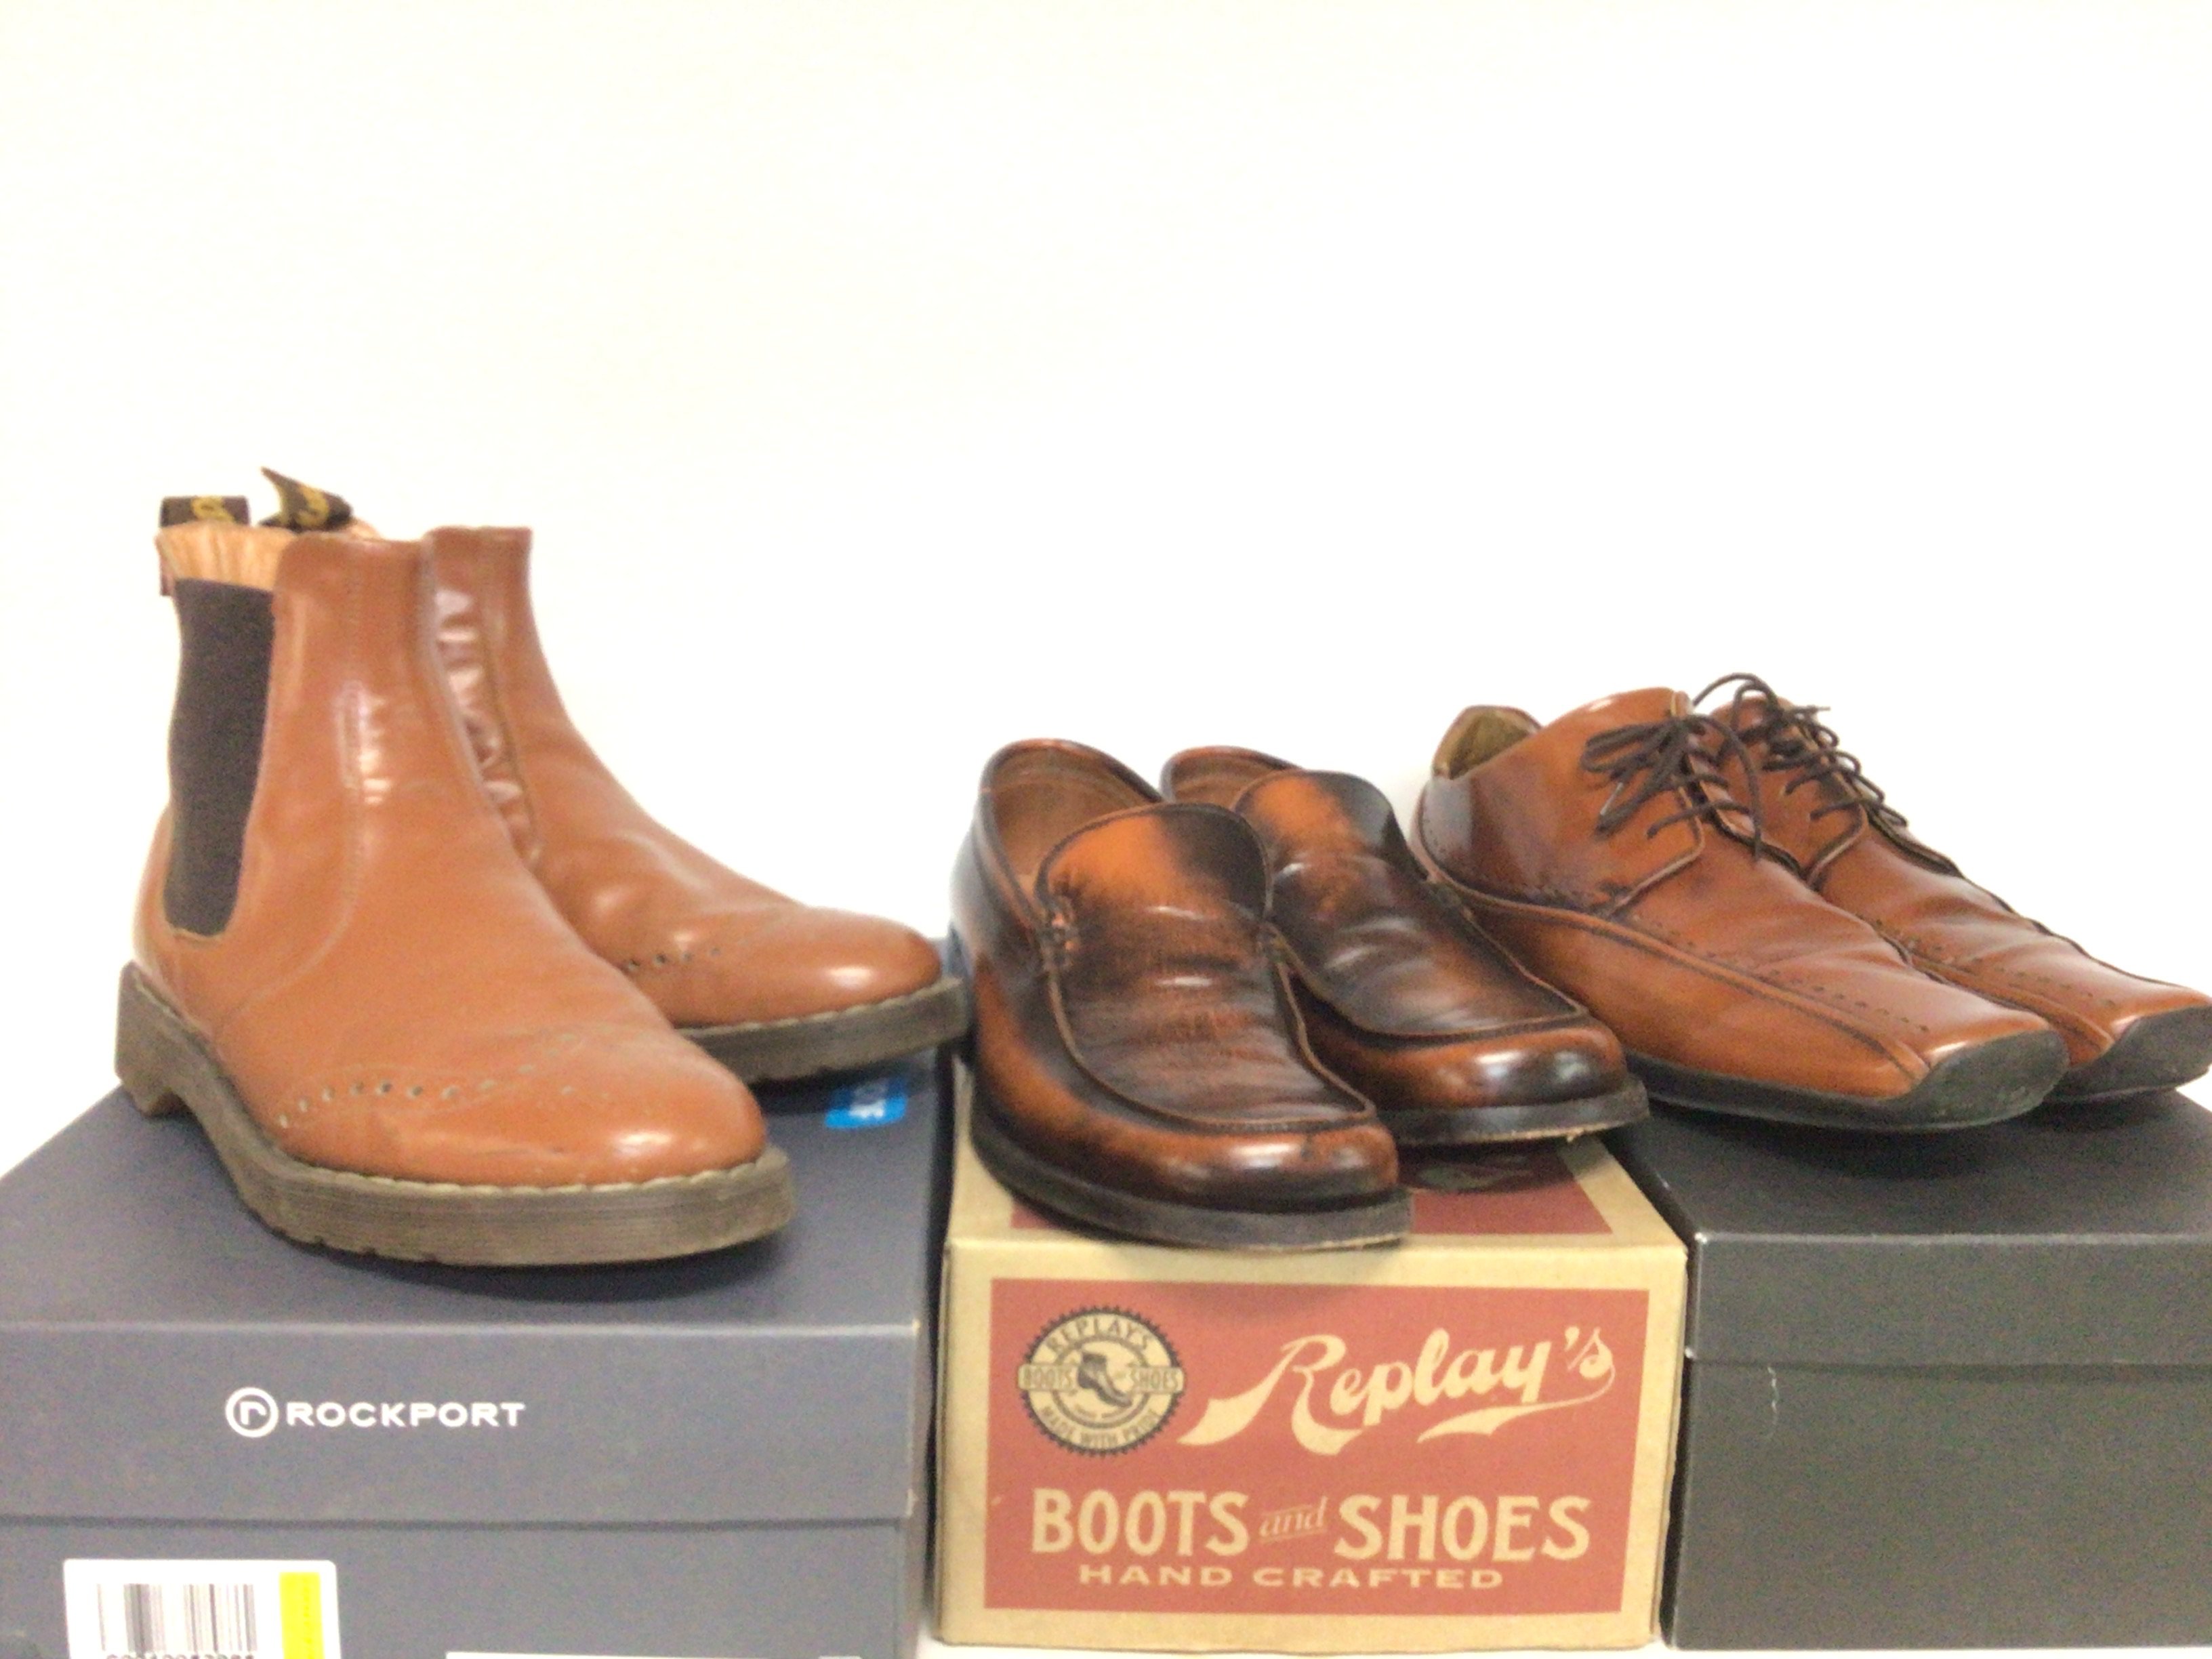 Mens size 8 shoes and boots including Dr Martens,